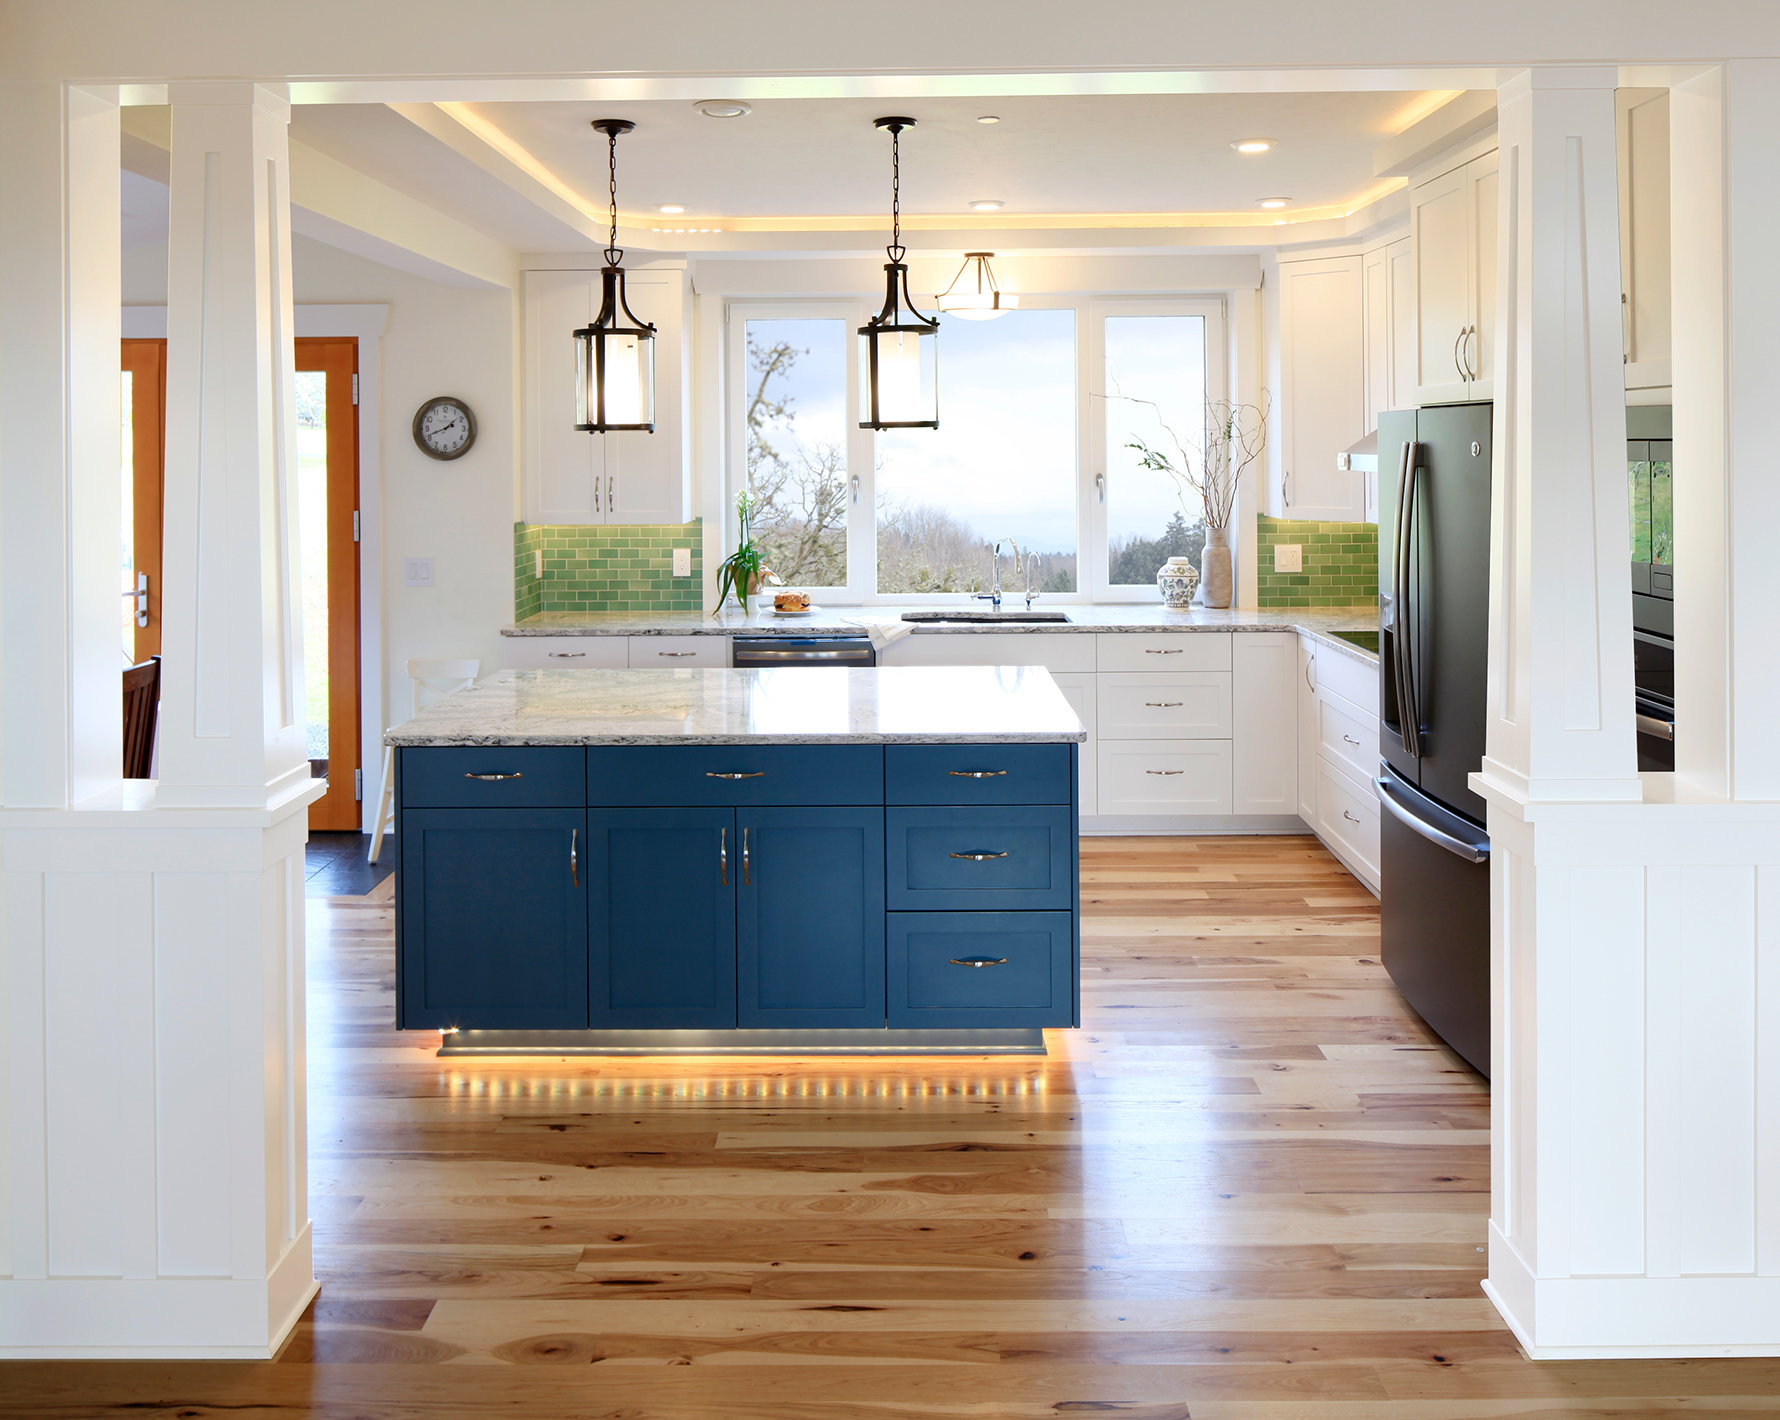 Featured on Houzz!